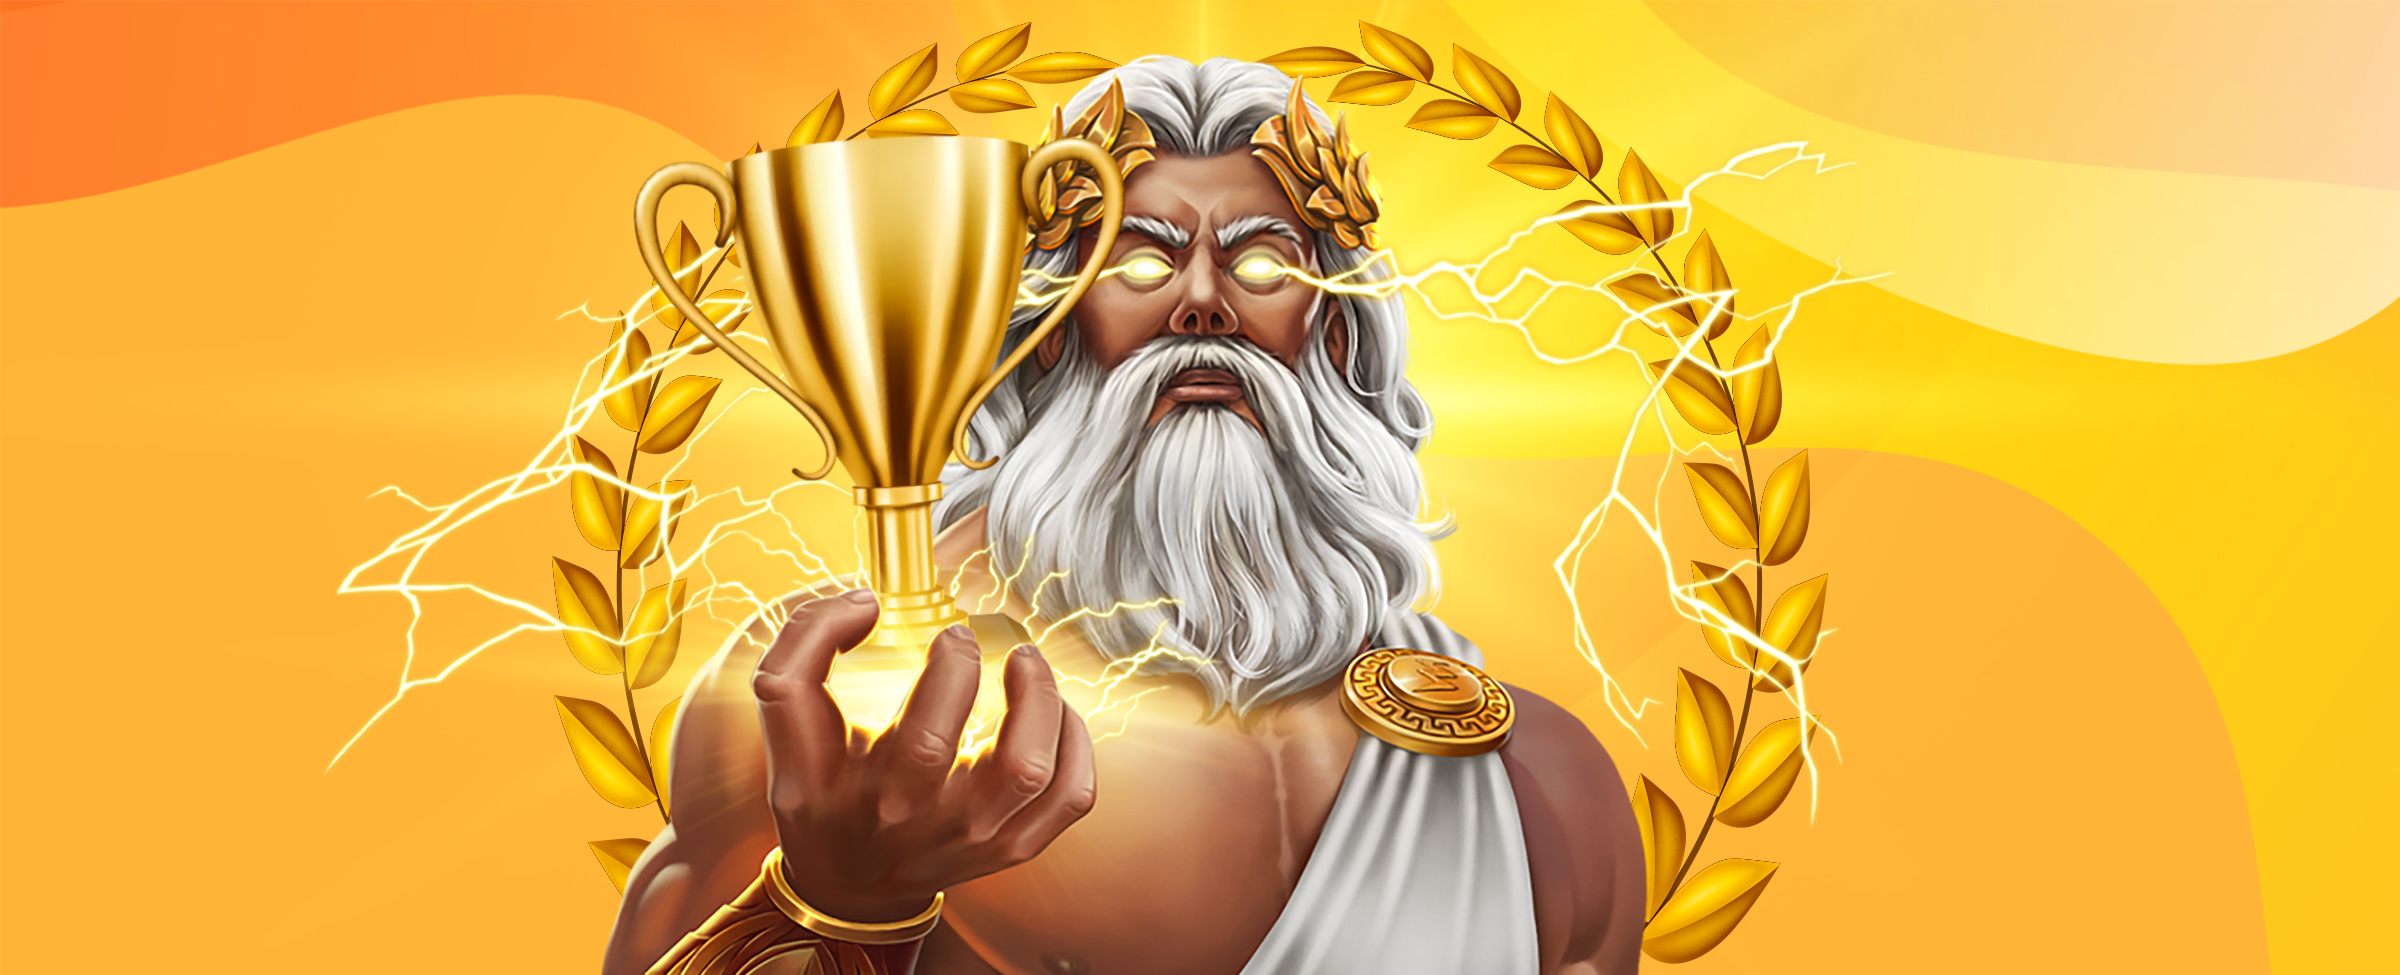 A 3D-animated depiction of Zeus, the God of the sky, wearing a robe with a gold pendant, holding up a gold trophy in one hand, while lightning appears to sprawl out from his eyes.